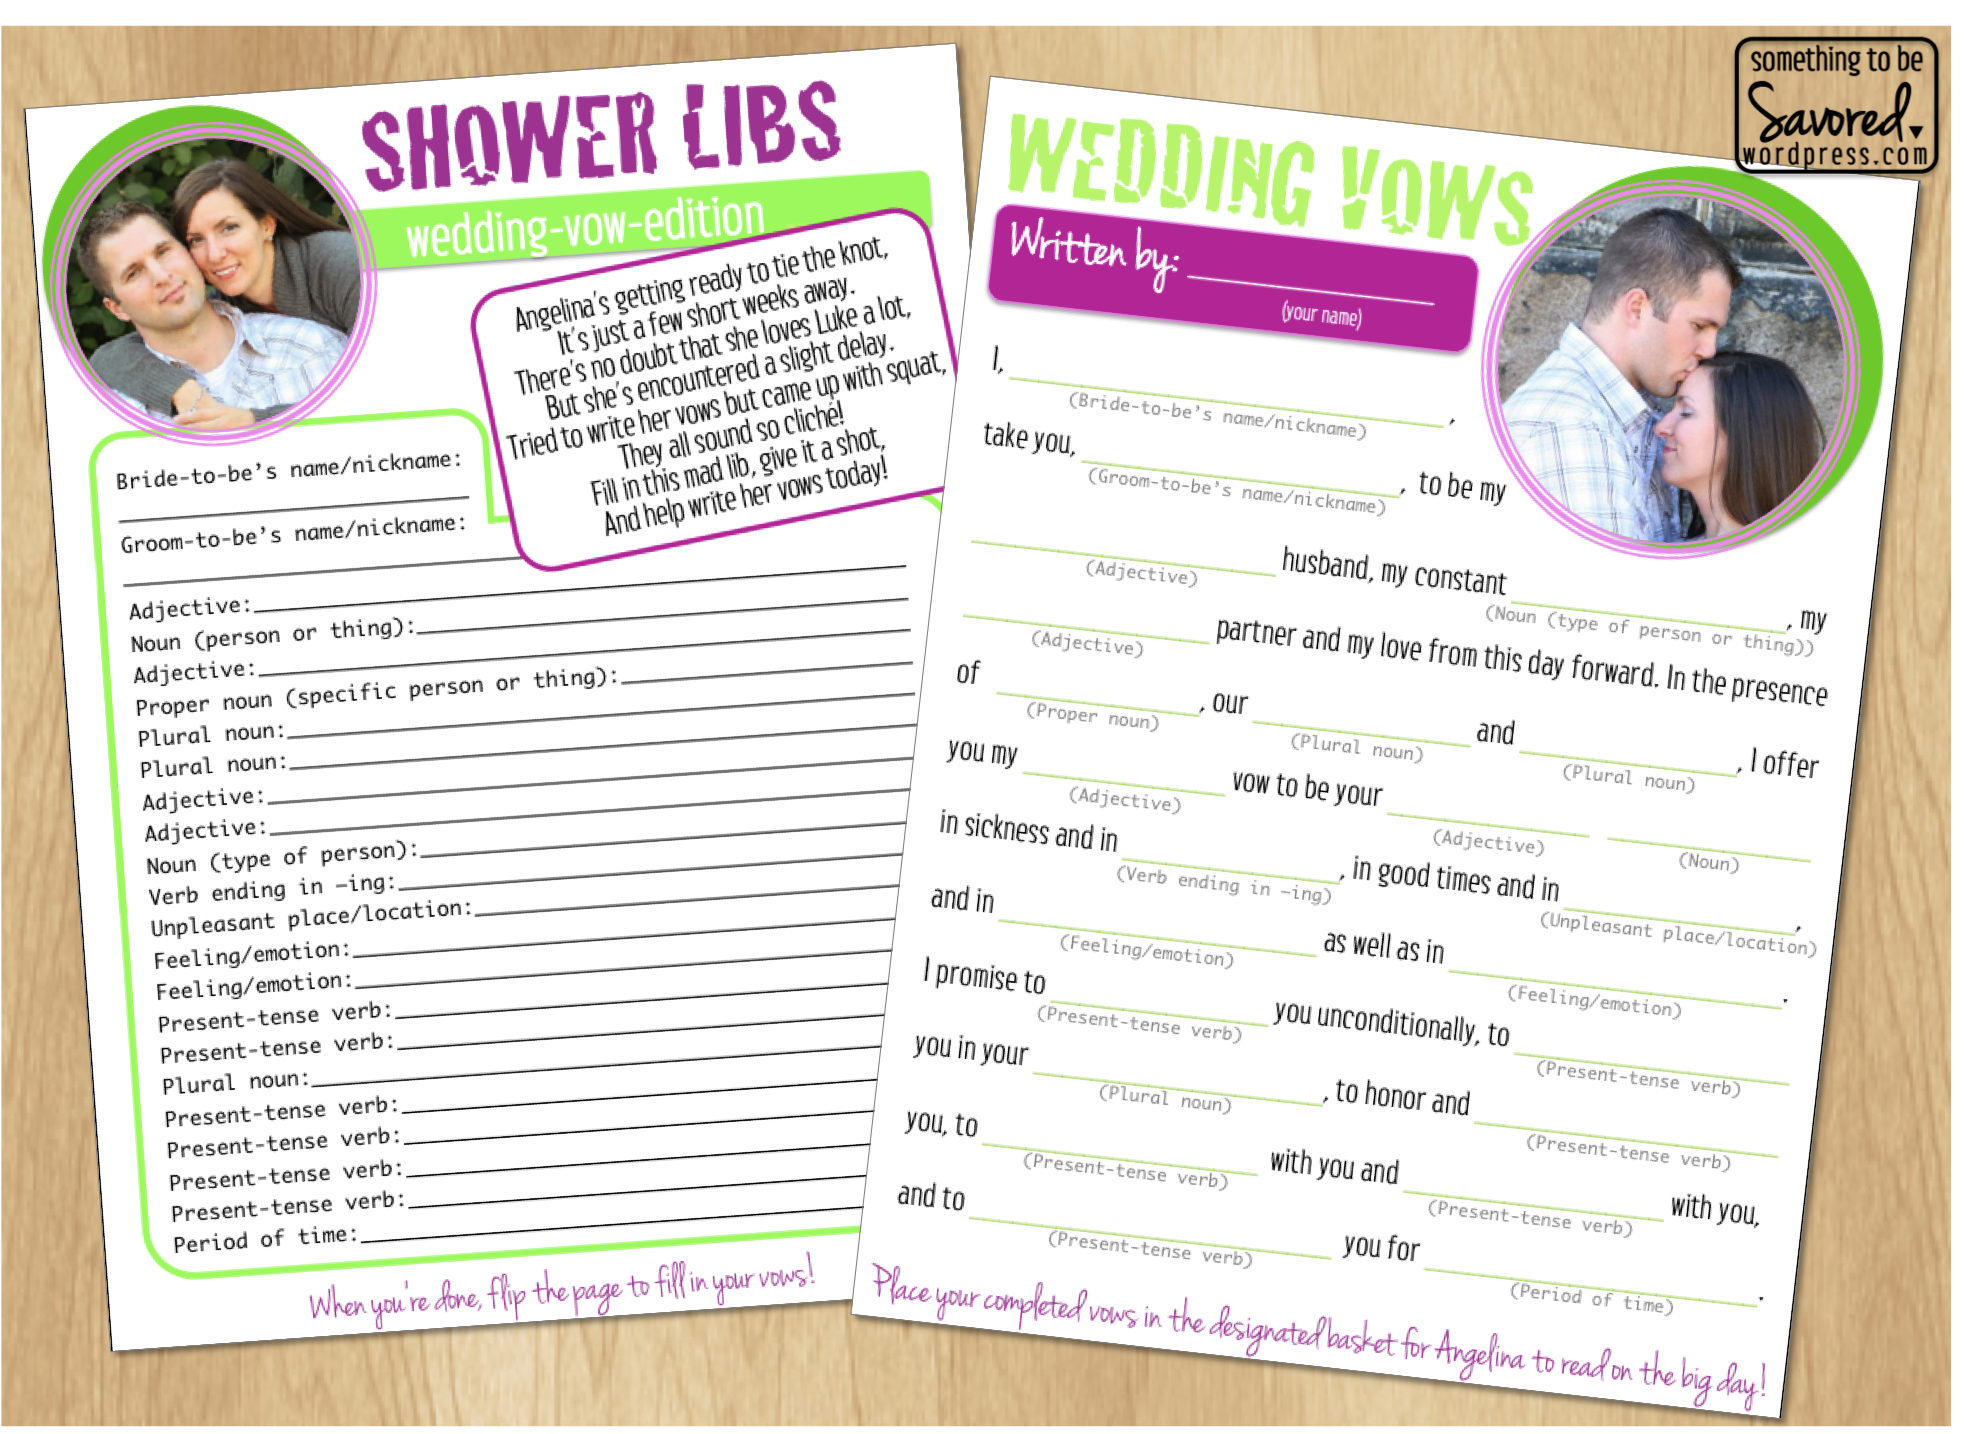 4-best-images-of-bridal-shower-mad-libs-printable-free-printable-bridal-shower-mad-libs-mad